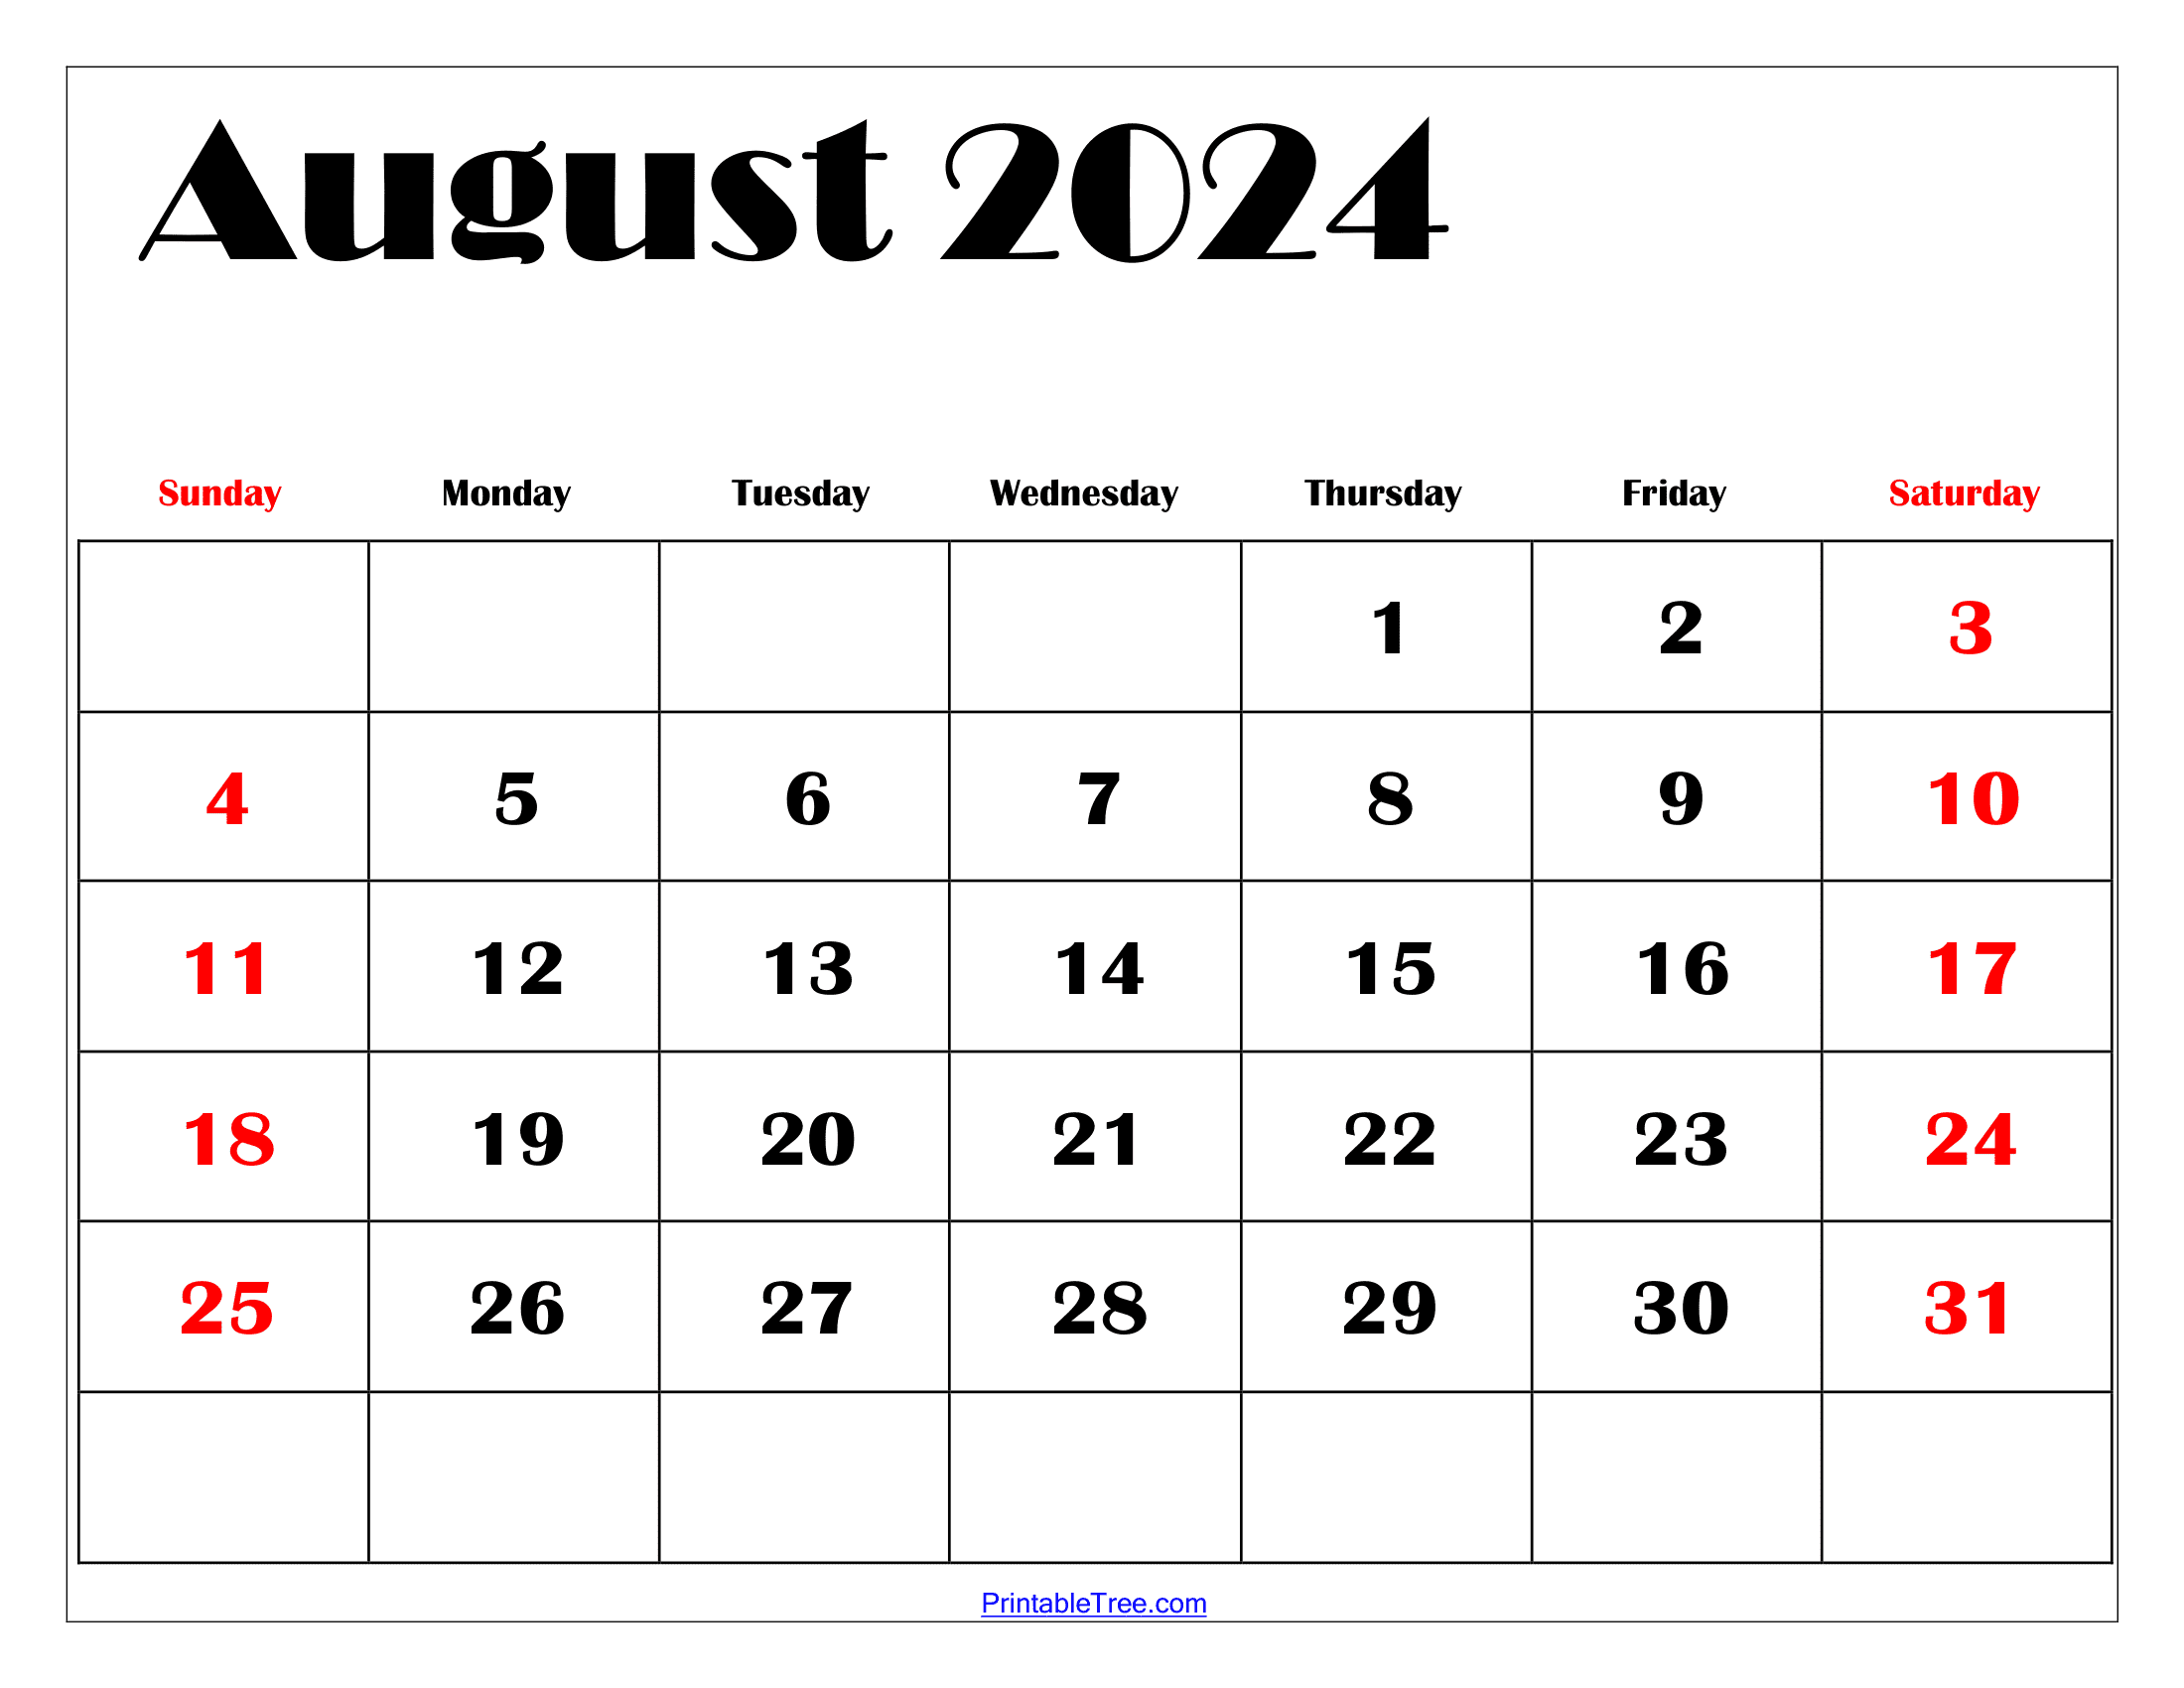 August 2024 Calendar Printable Pdf Templates Free Download pertaining to Free Printable August 2024 Monthly Calendar With Holidays